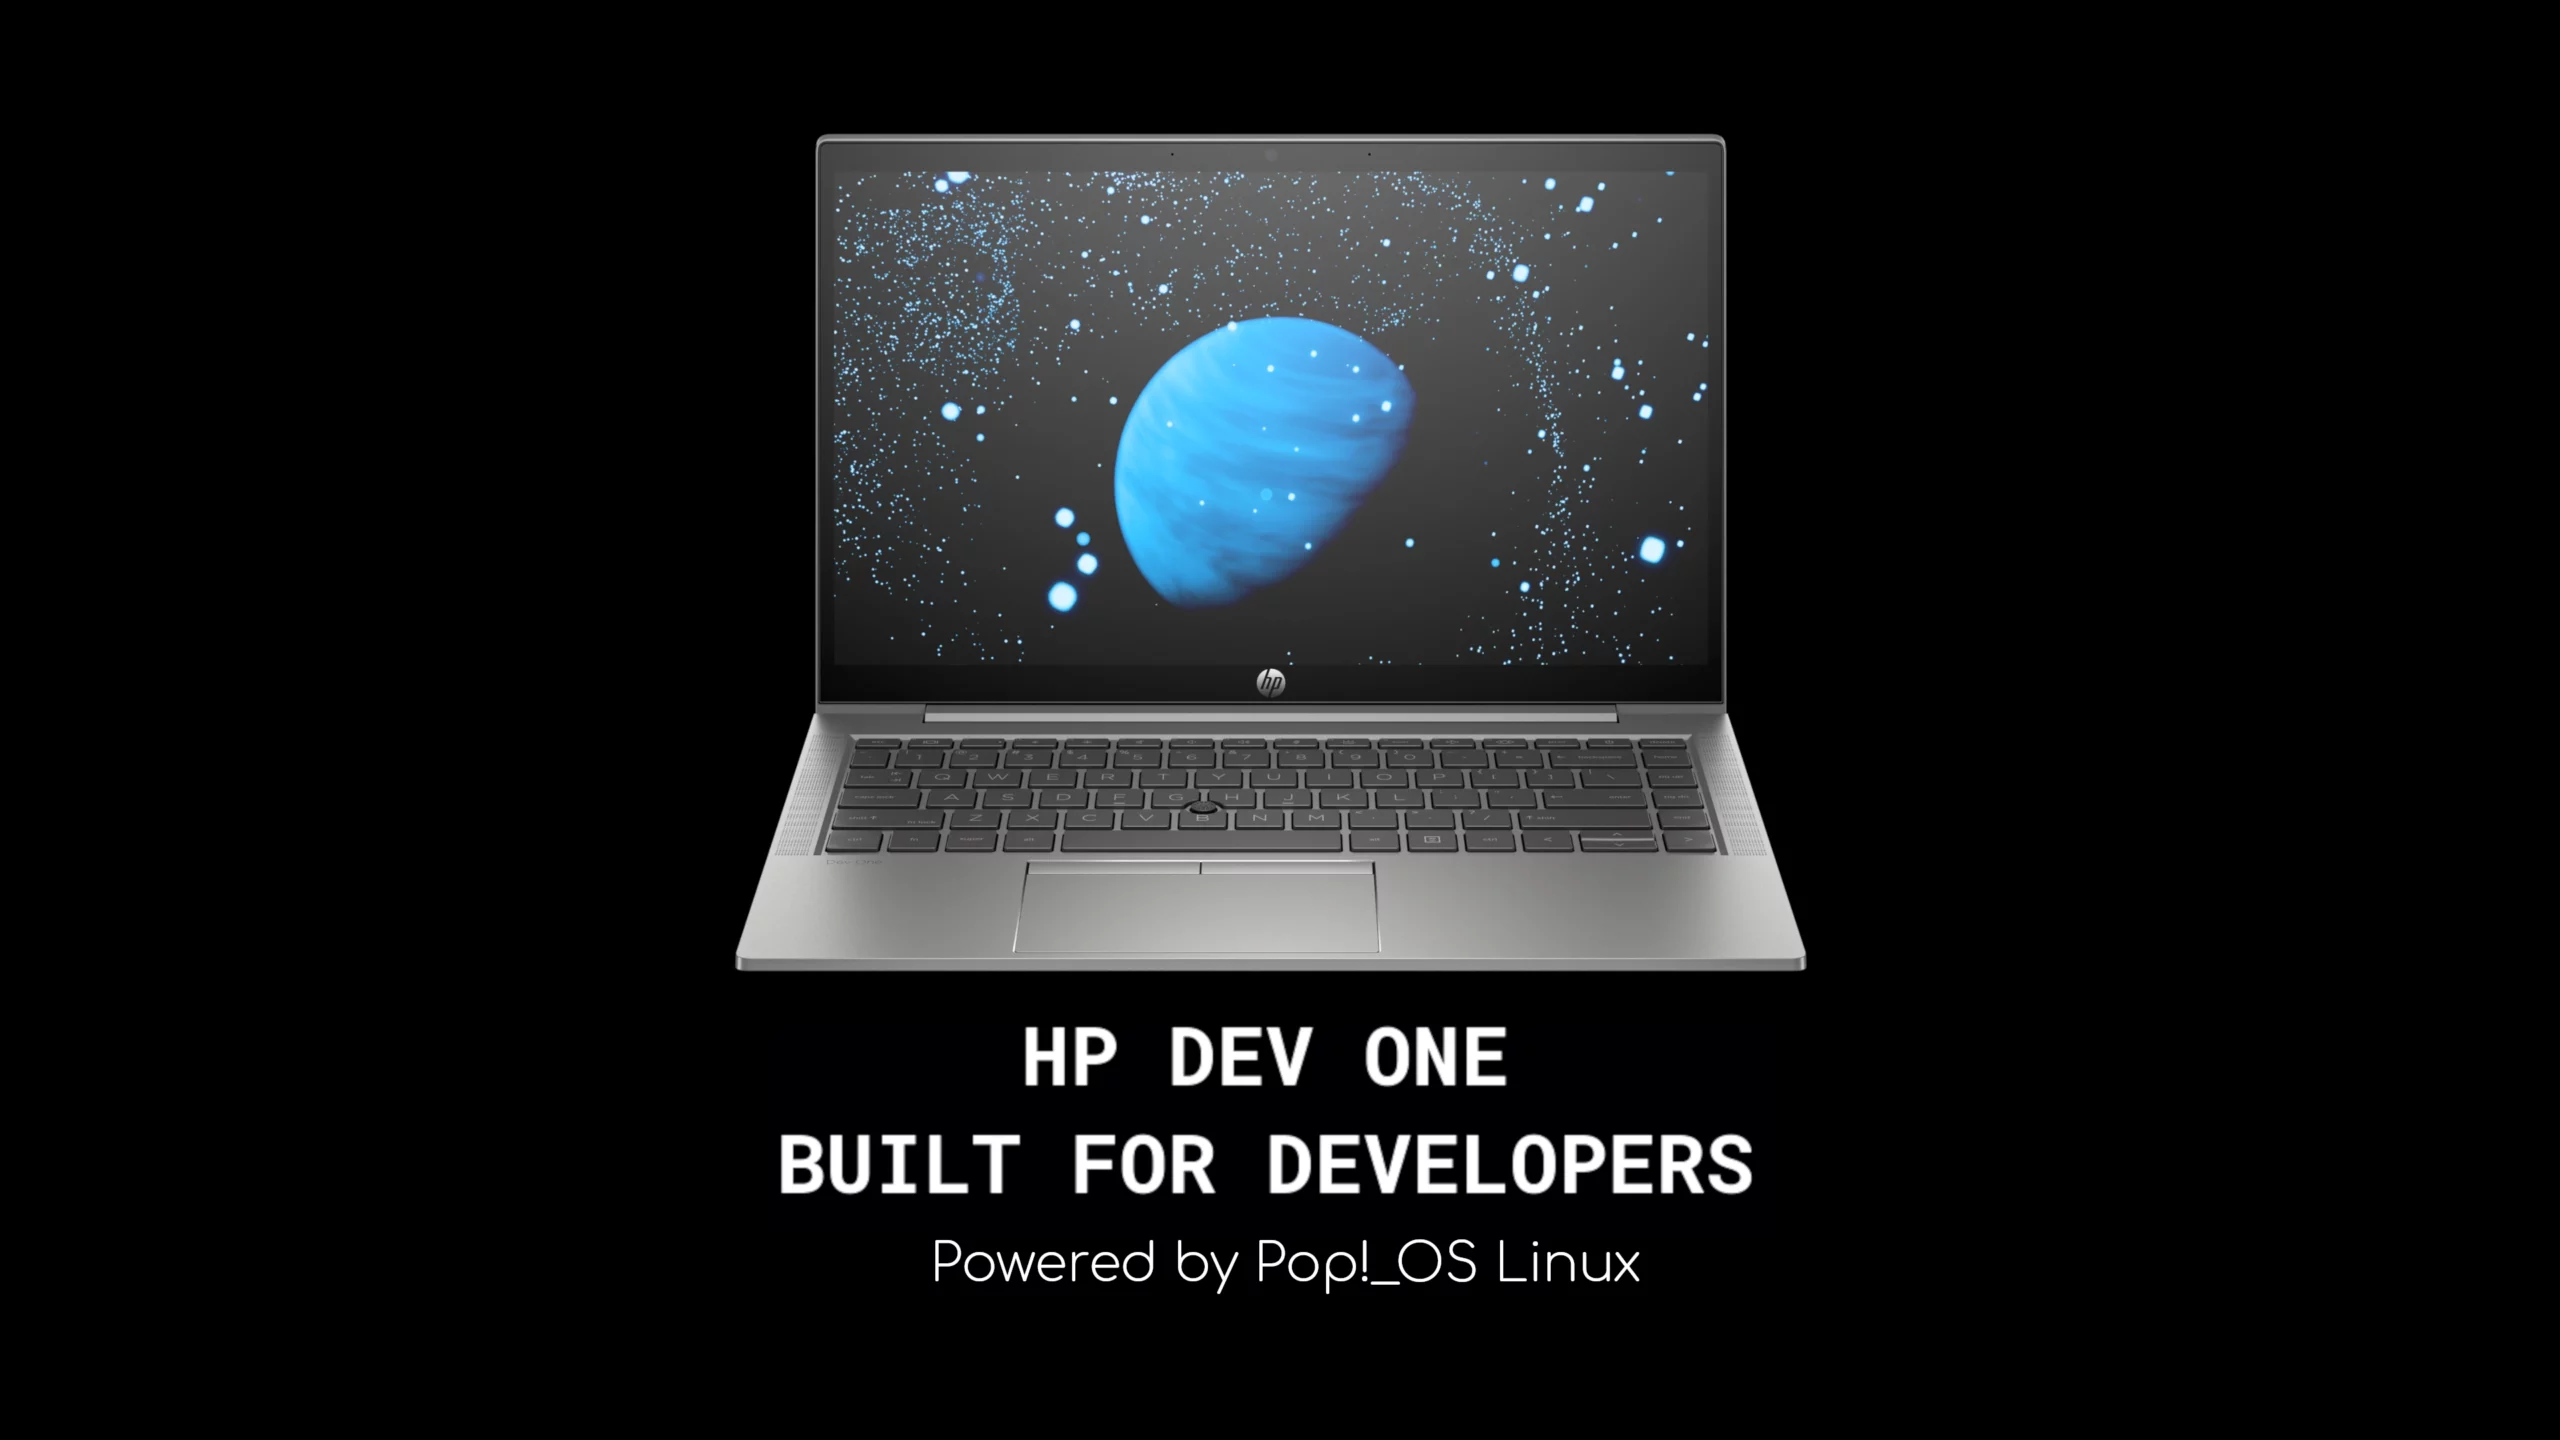 You Can Now Pre-Order the HP Dev One Linux Laptop Powered by Pop!_OS Linux